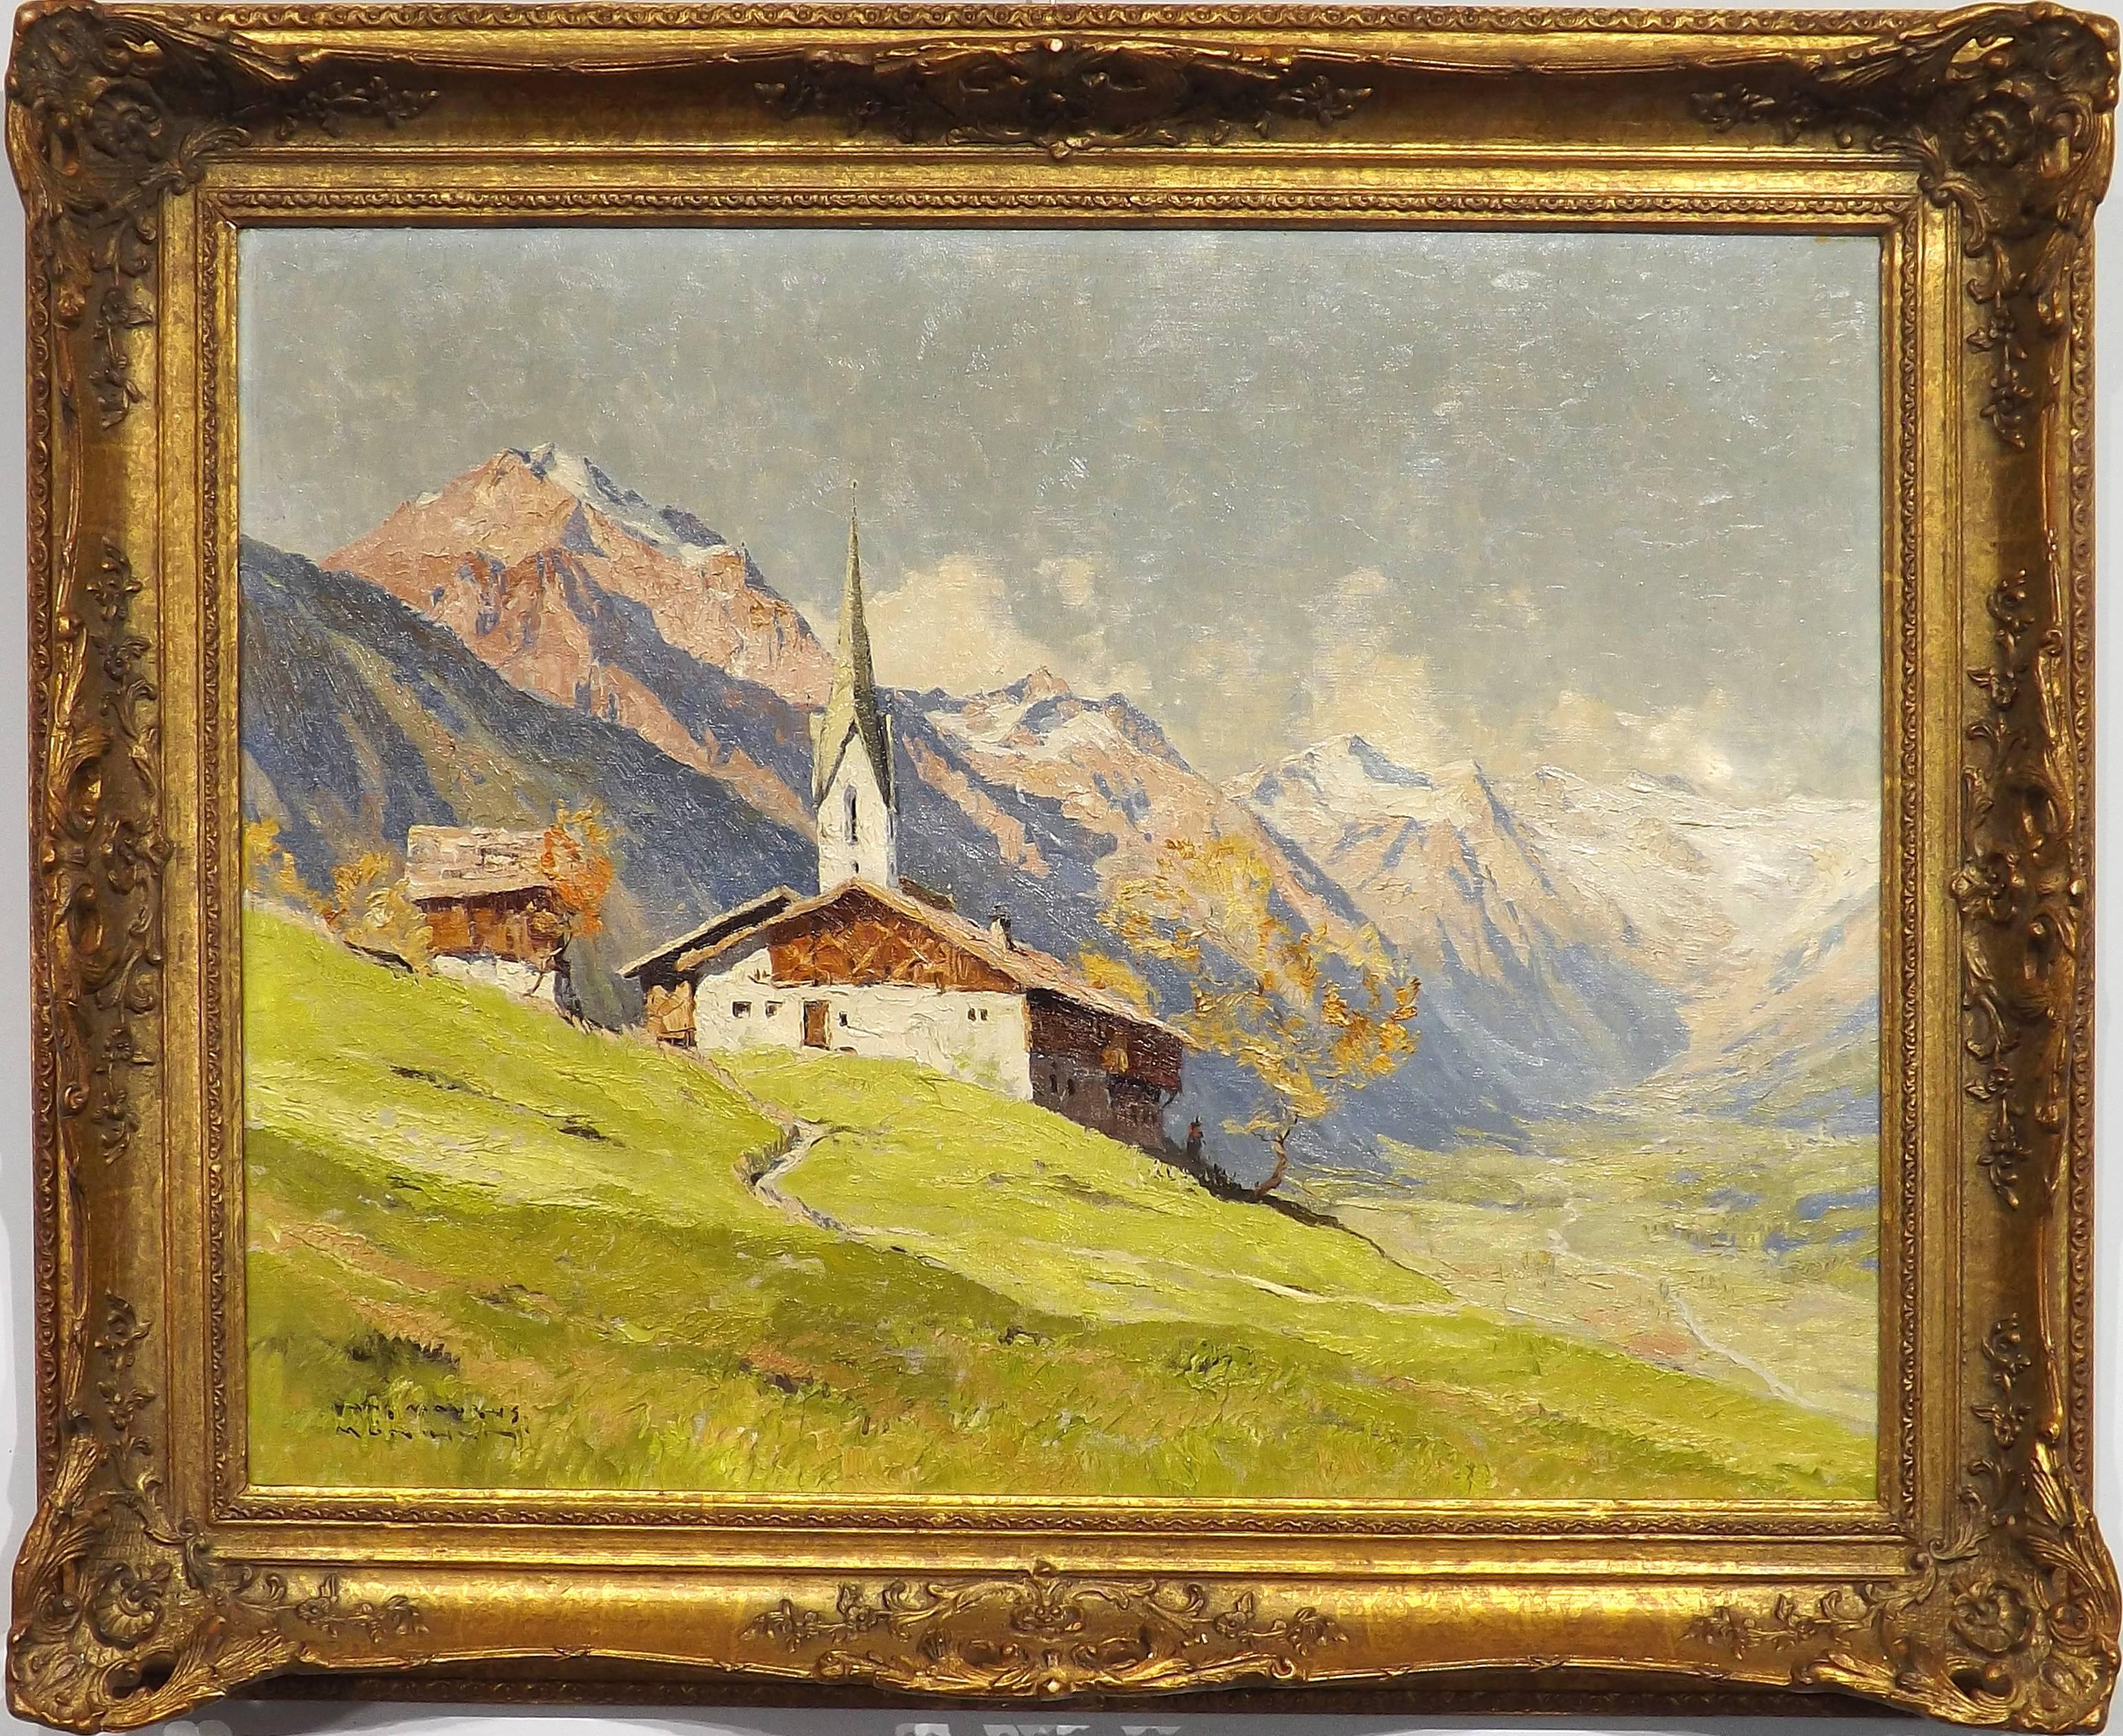 A stunning scene of the Alps by German painter Hans Maurus. The small village of Bichlbach can be seen down in the valley.

Maurus was born in 1901 and along with his friend and mentor E.H. Compton was considered one of the last four 'aces' to